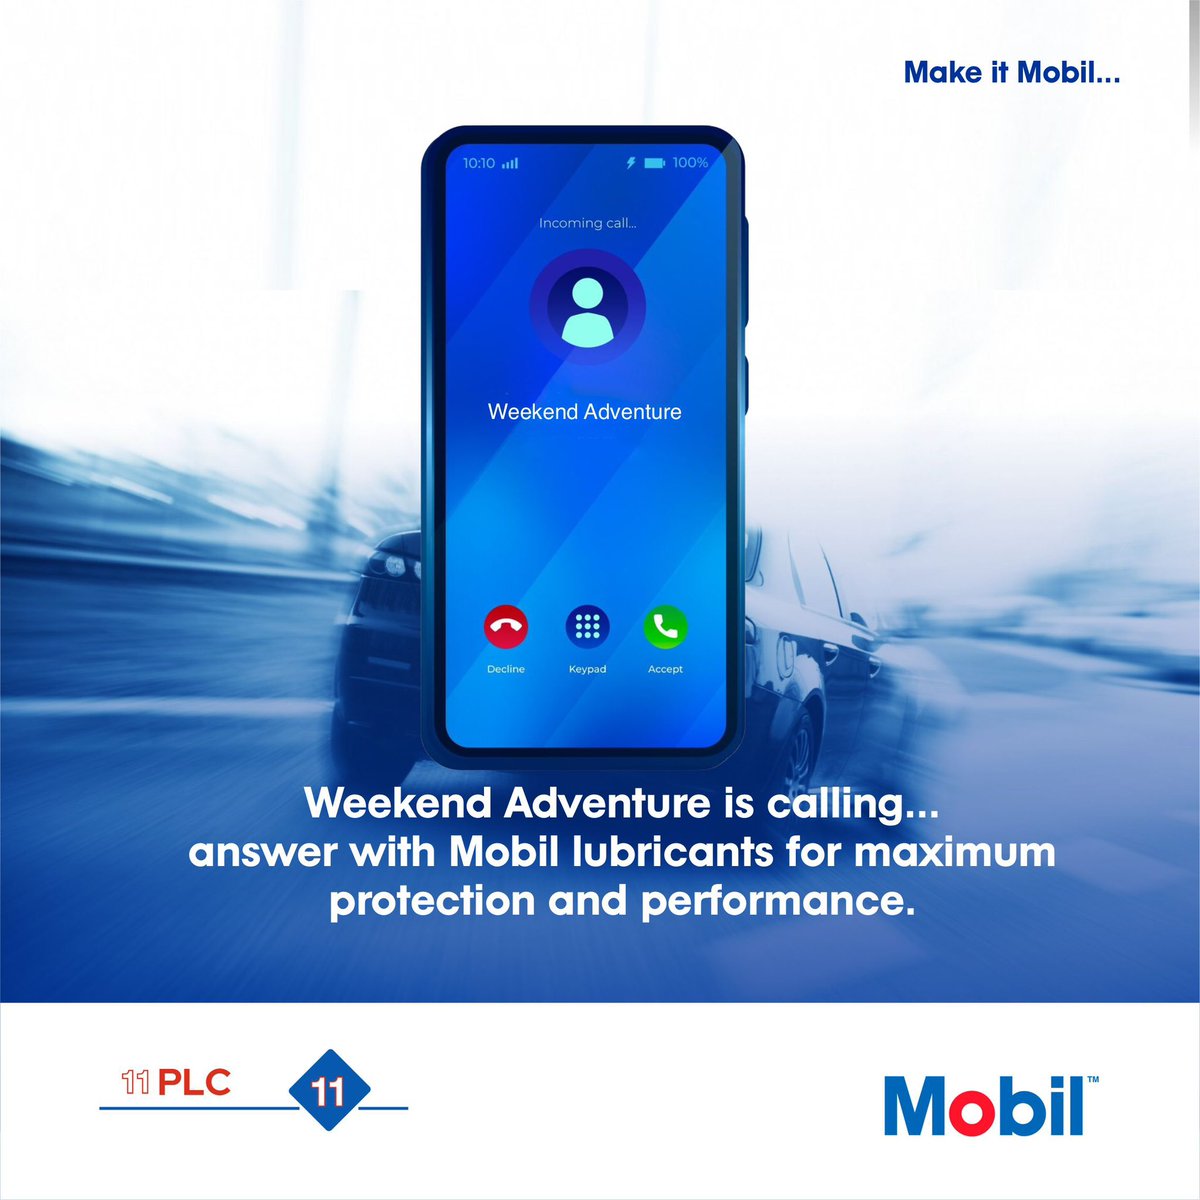 Weekend adventures is calling, make sure your vehicle is ready with Mobil Lubricants for maximum protection and performance.

#fridayvibes #weekendadventures #mobillubricants #enginecare #engineprotection #mobilinnigeria